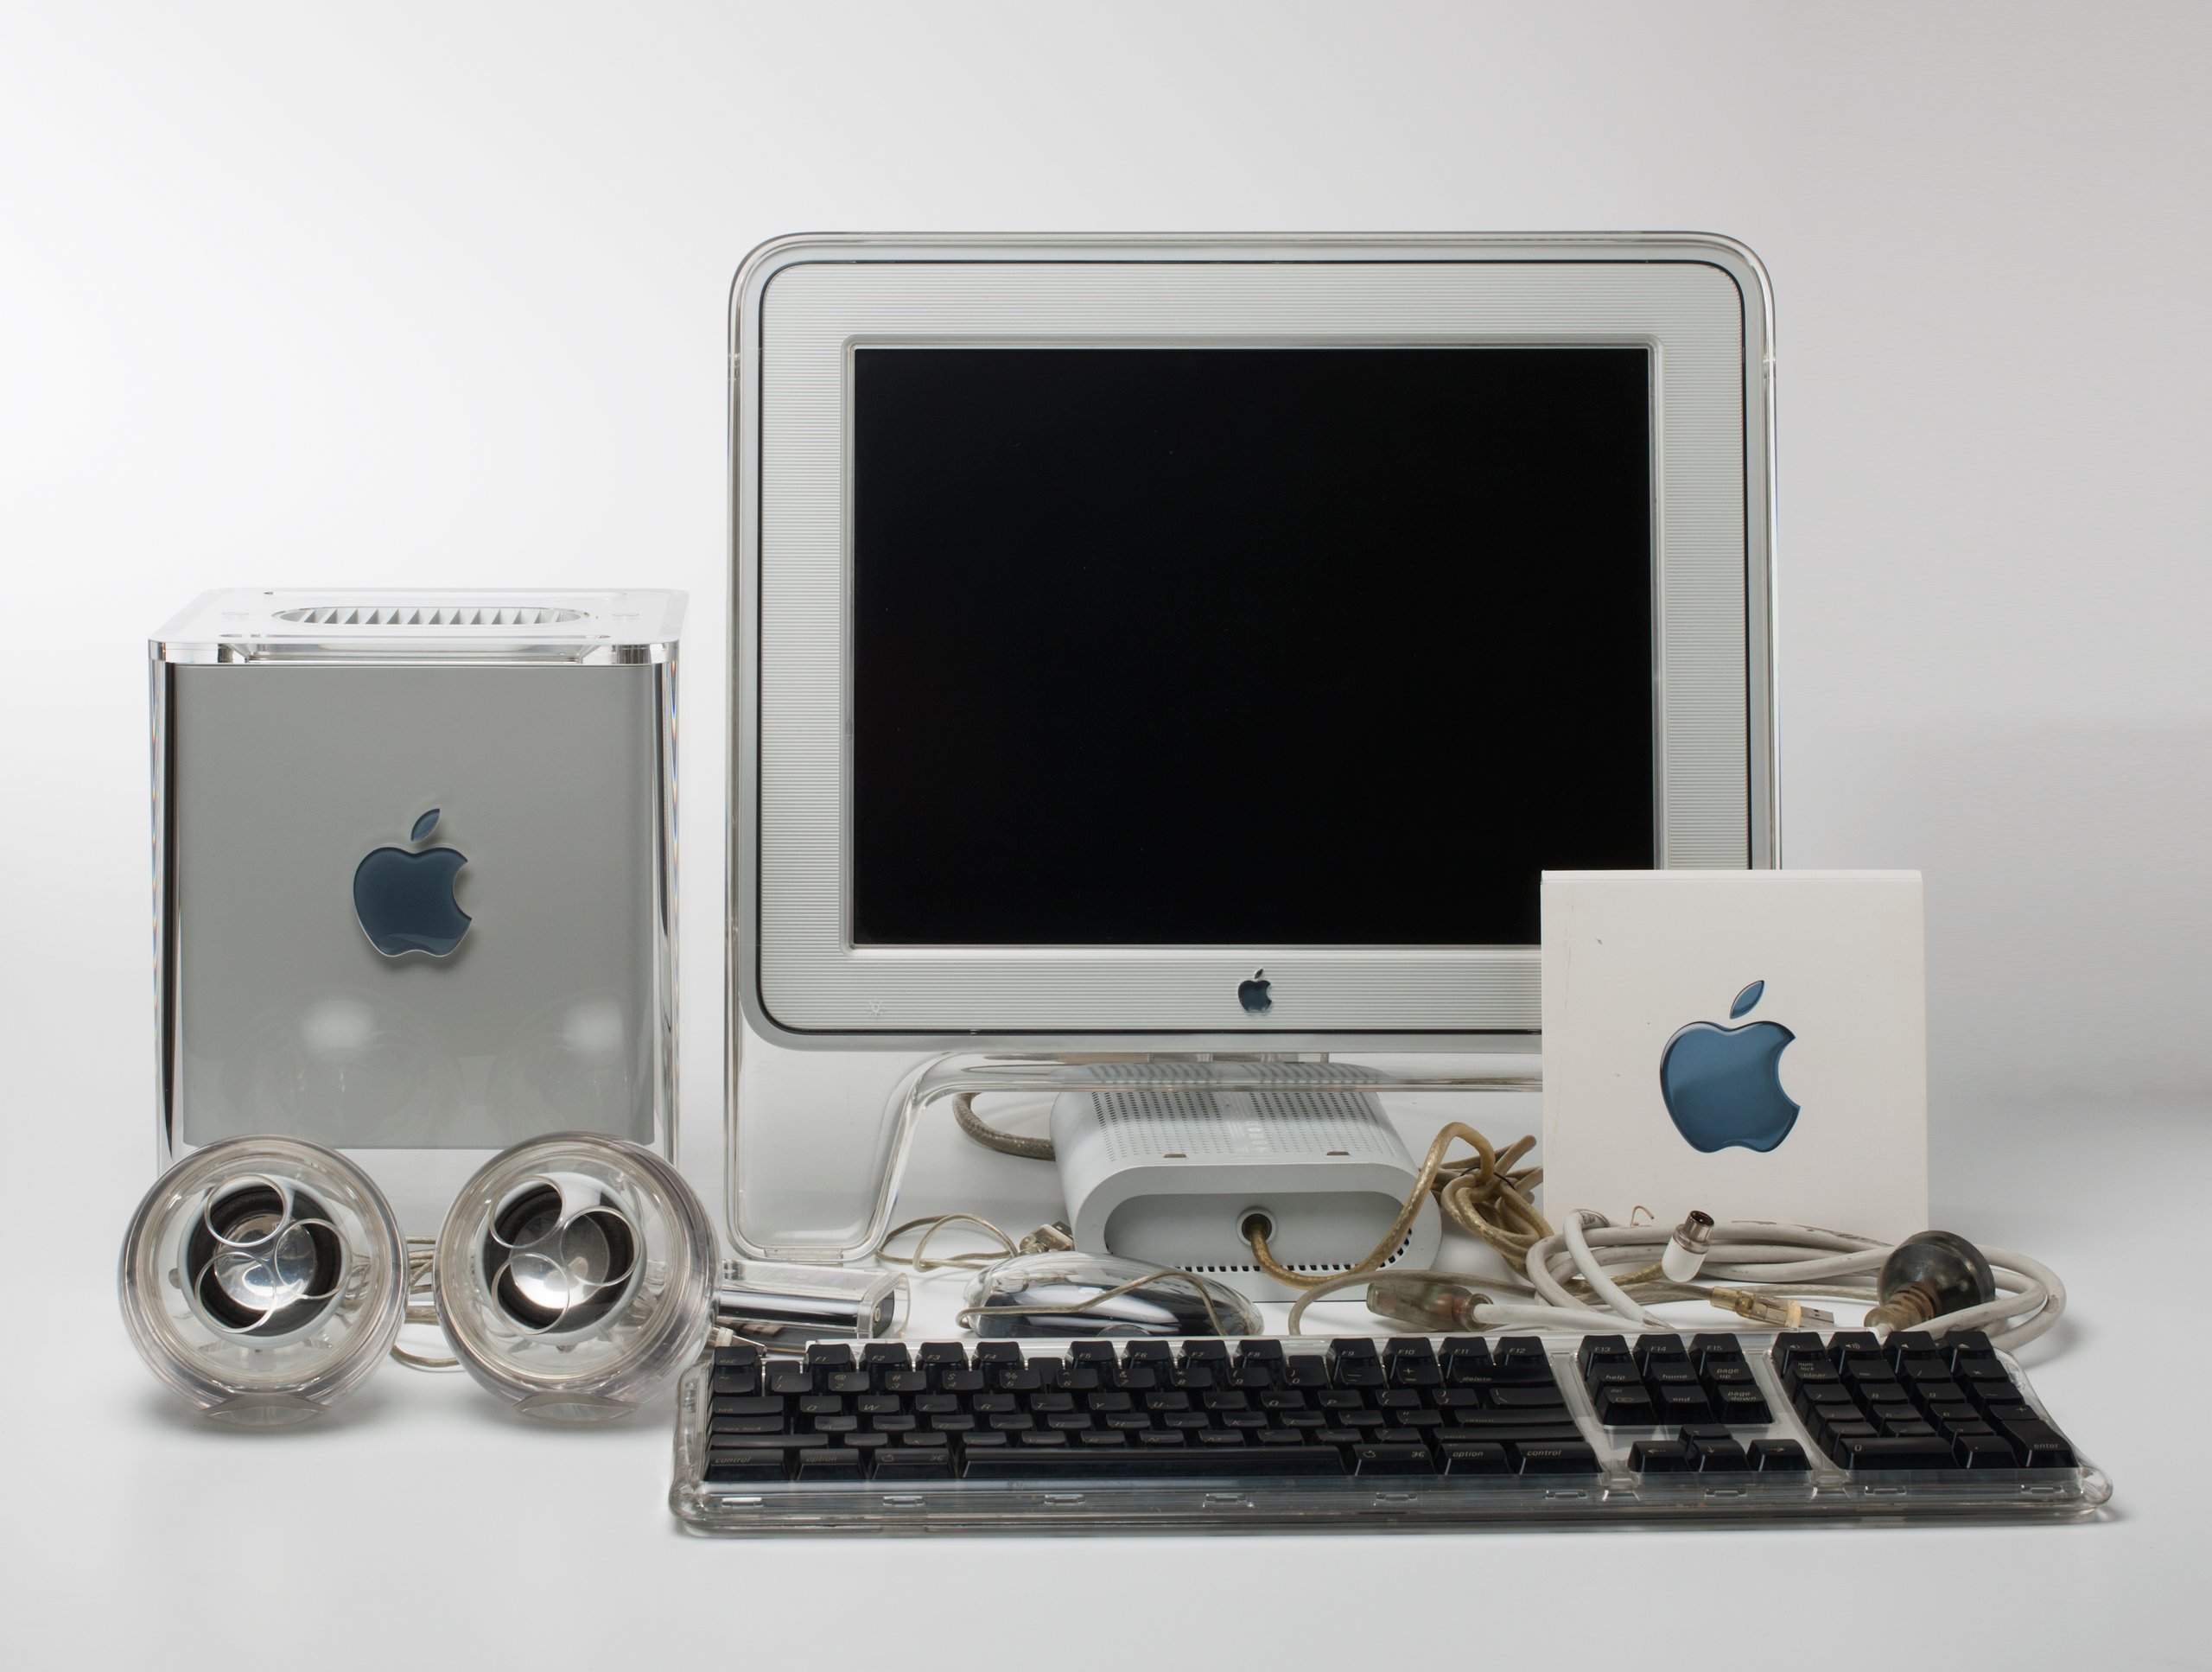 Apple Power Mac G4 Cube computer with accessories